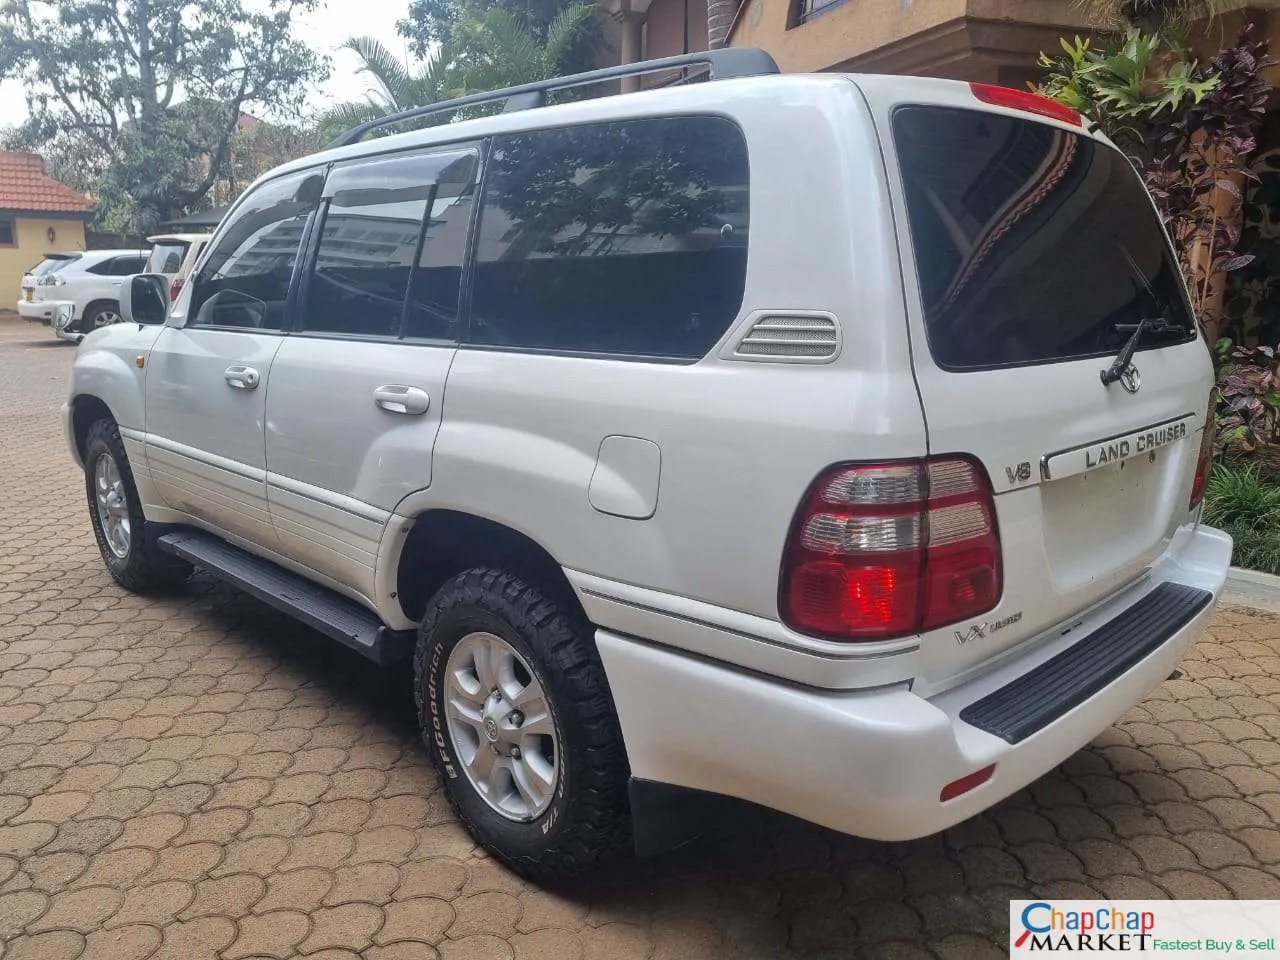 Toyota Landcruiser V8 100 SERIES You Pay 30% Deposit Trade in Ok Amazon 100 series for sale in kenya hire purchase installments EXCLUSIVE